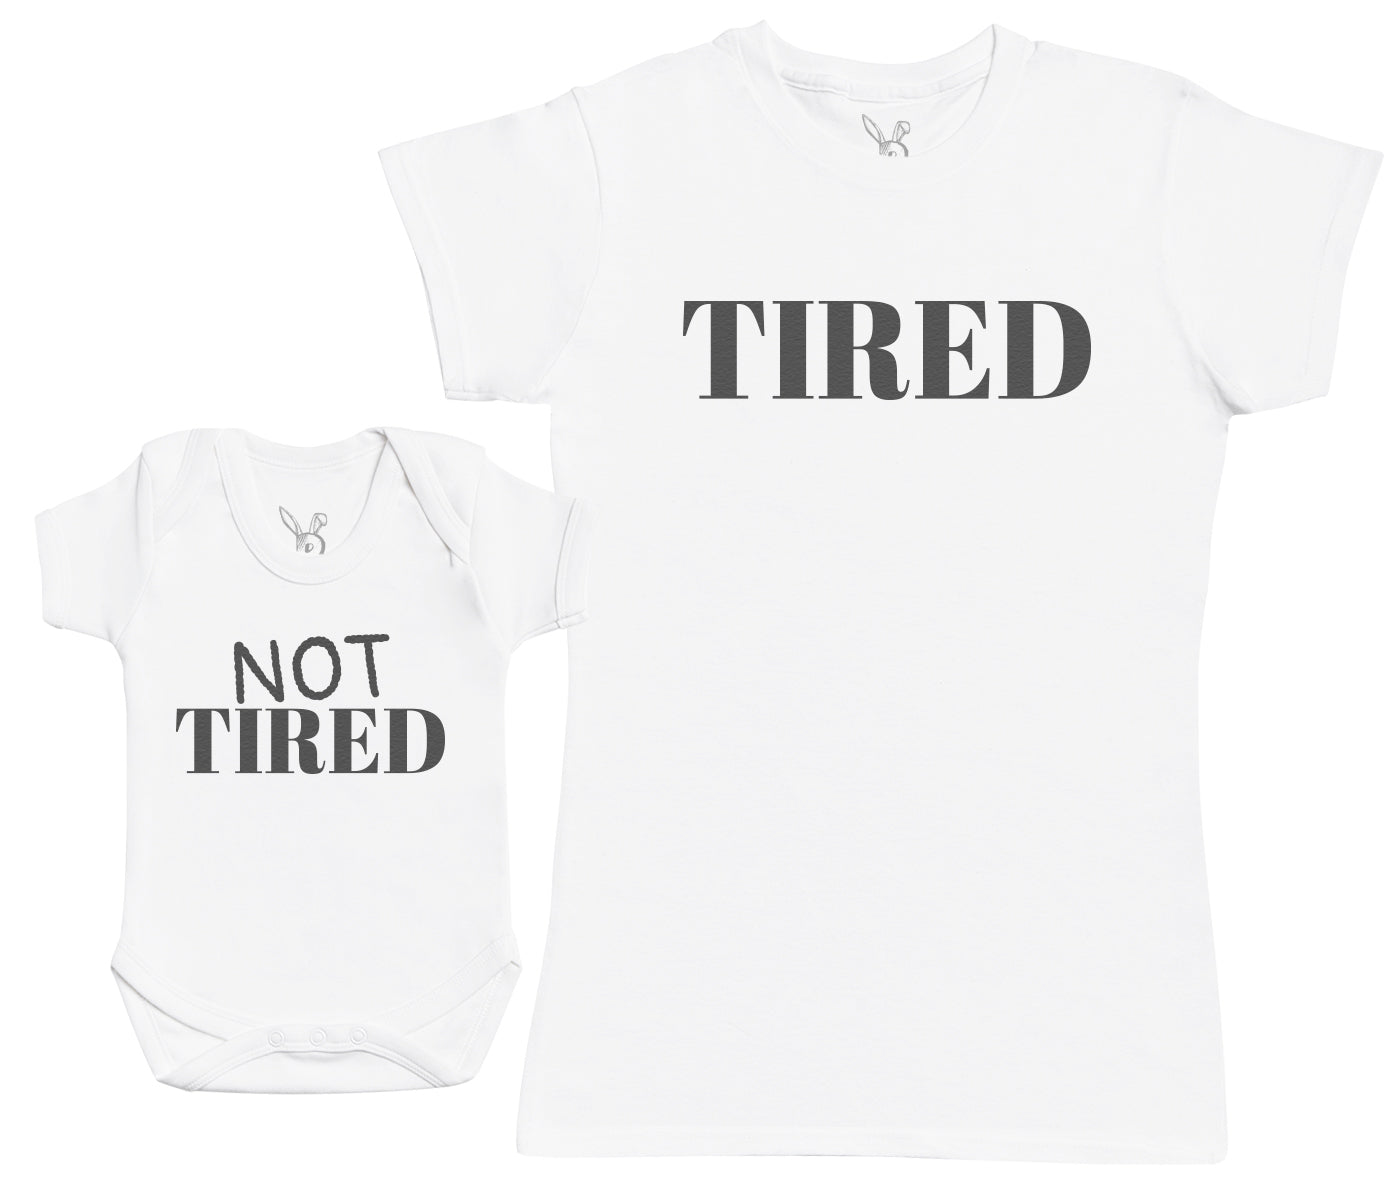 Tired & Not Tired - Matching Set Gift Set - (Sold Separately)